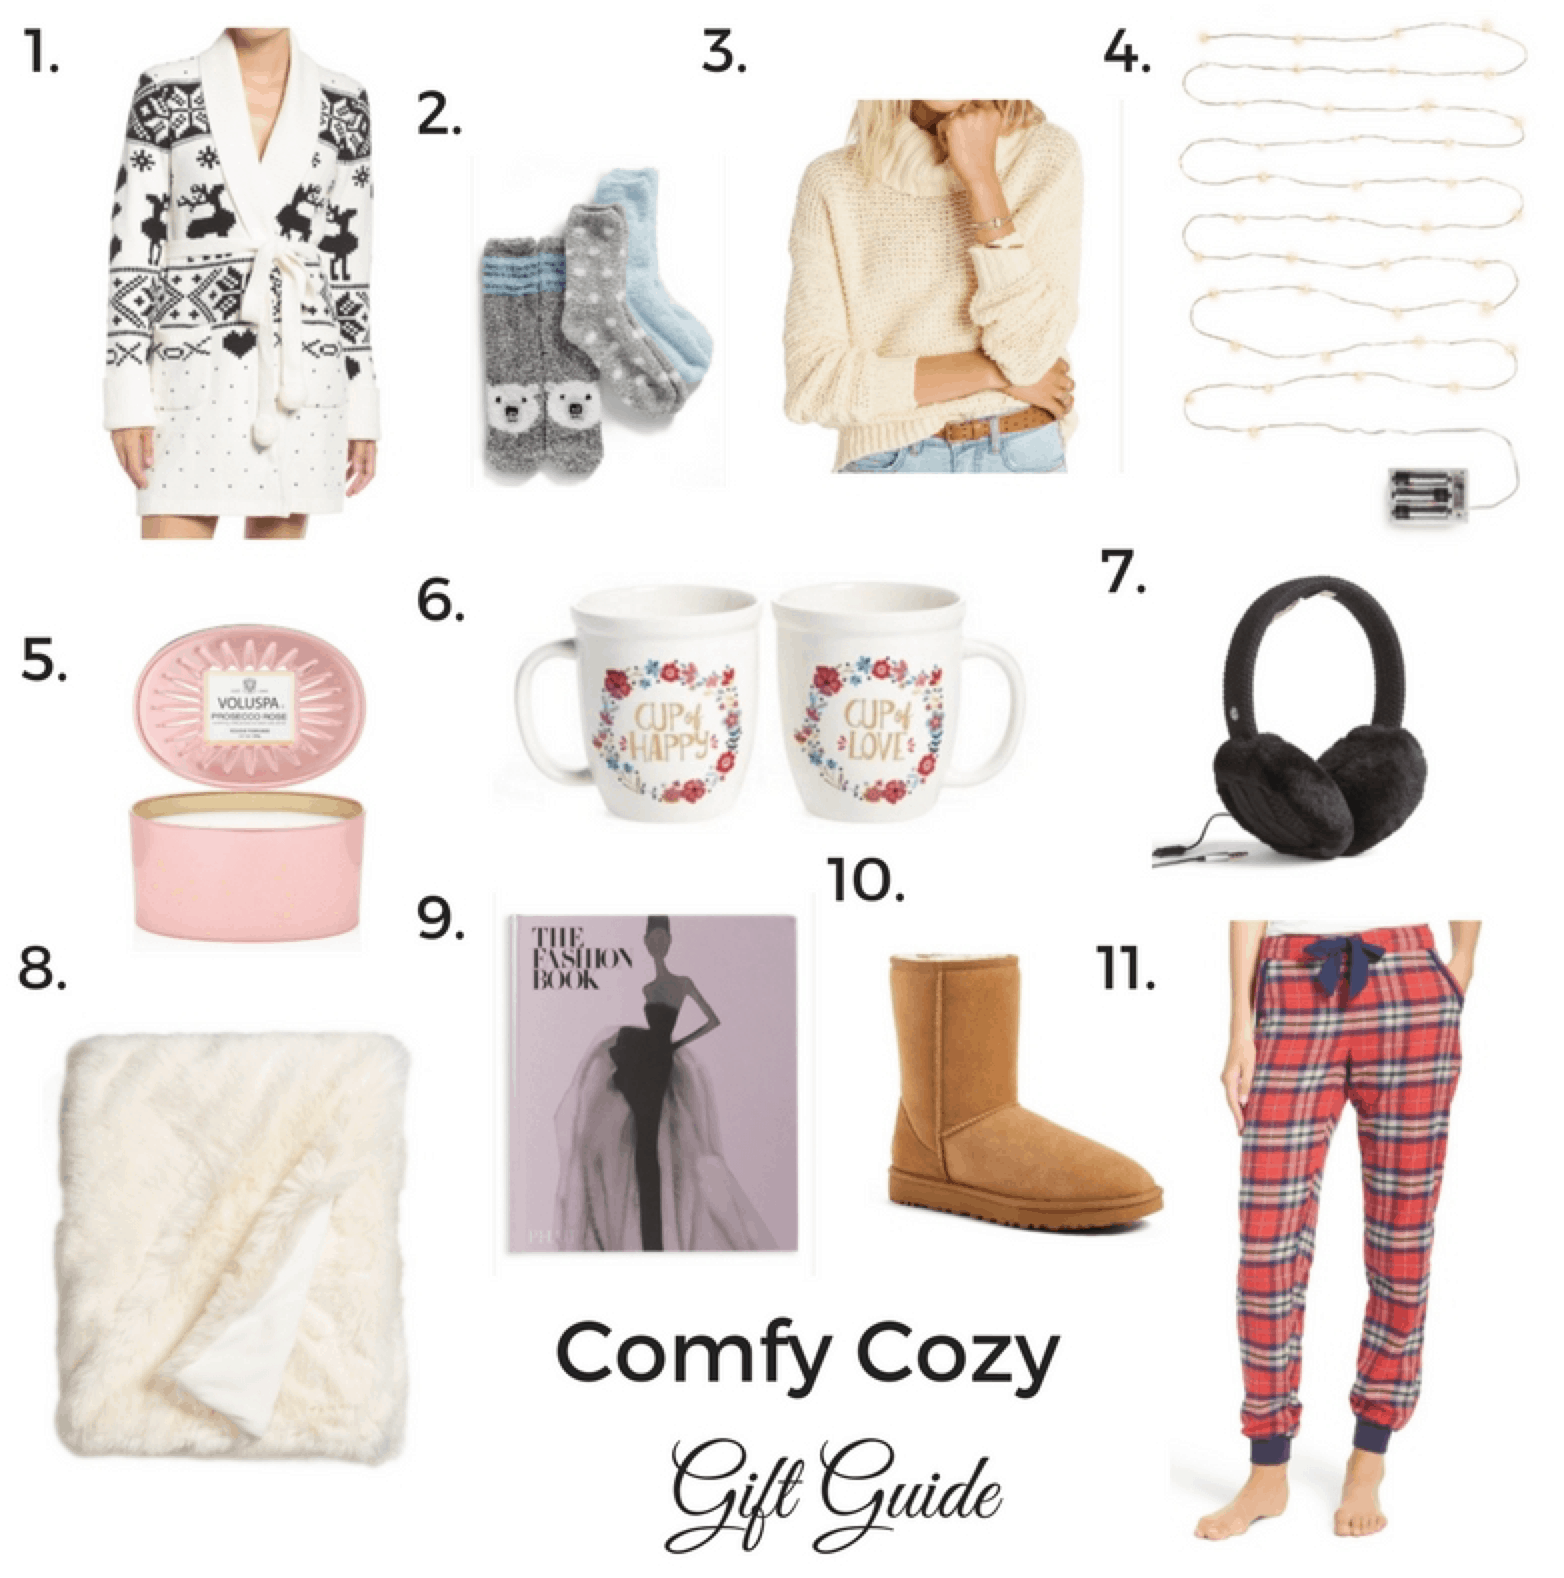 Comfy Cozy Gift Guide